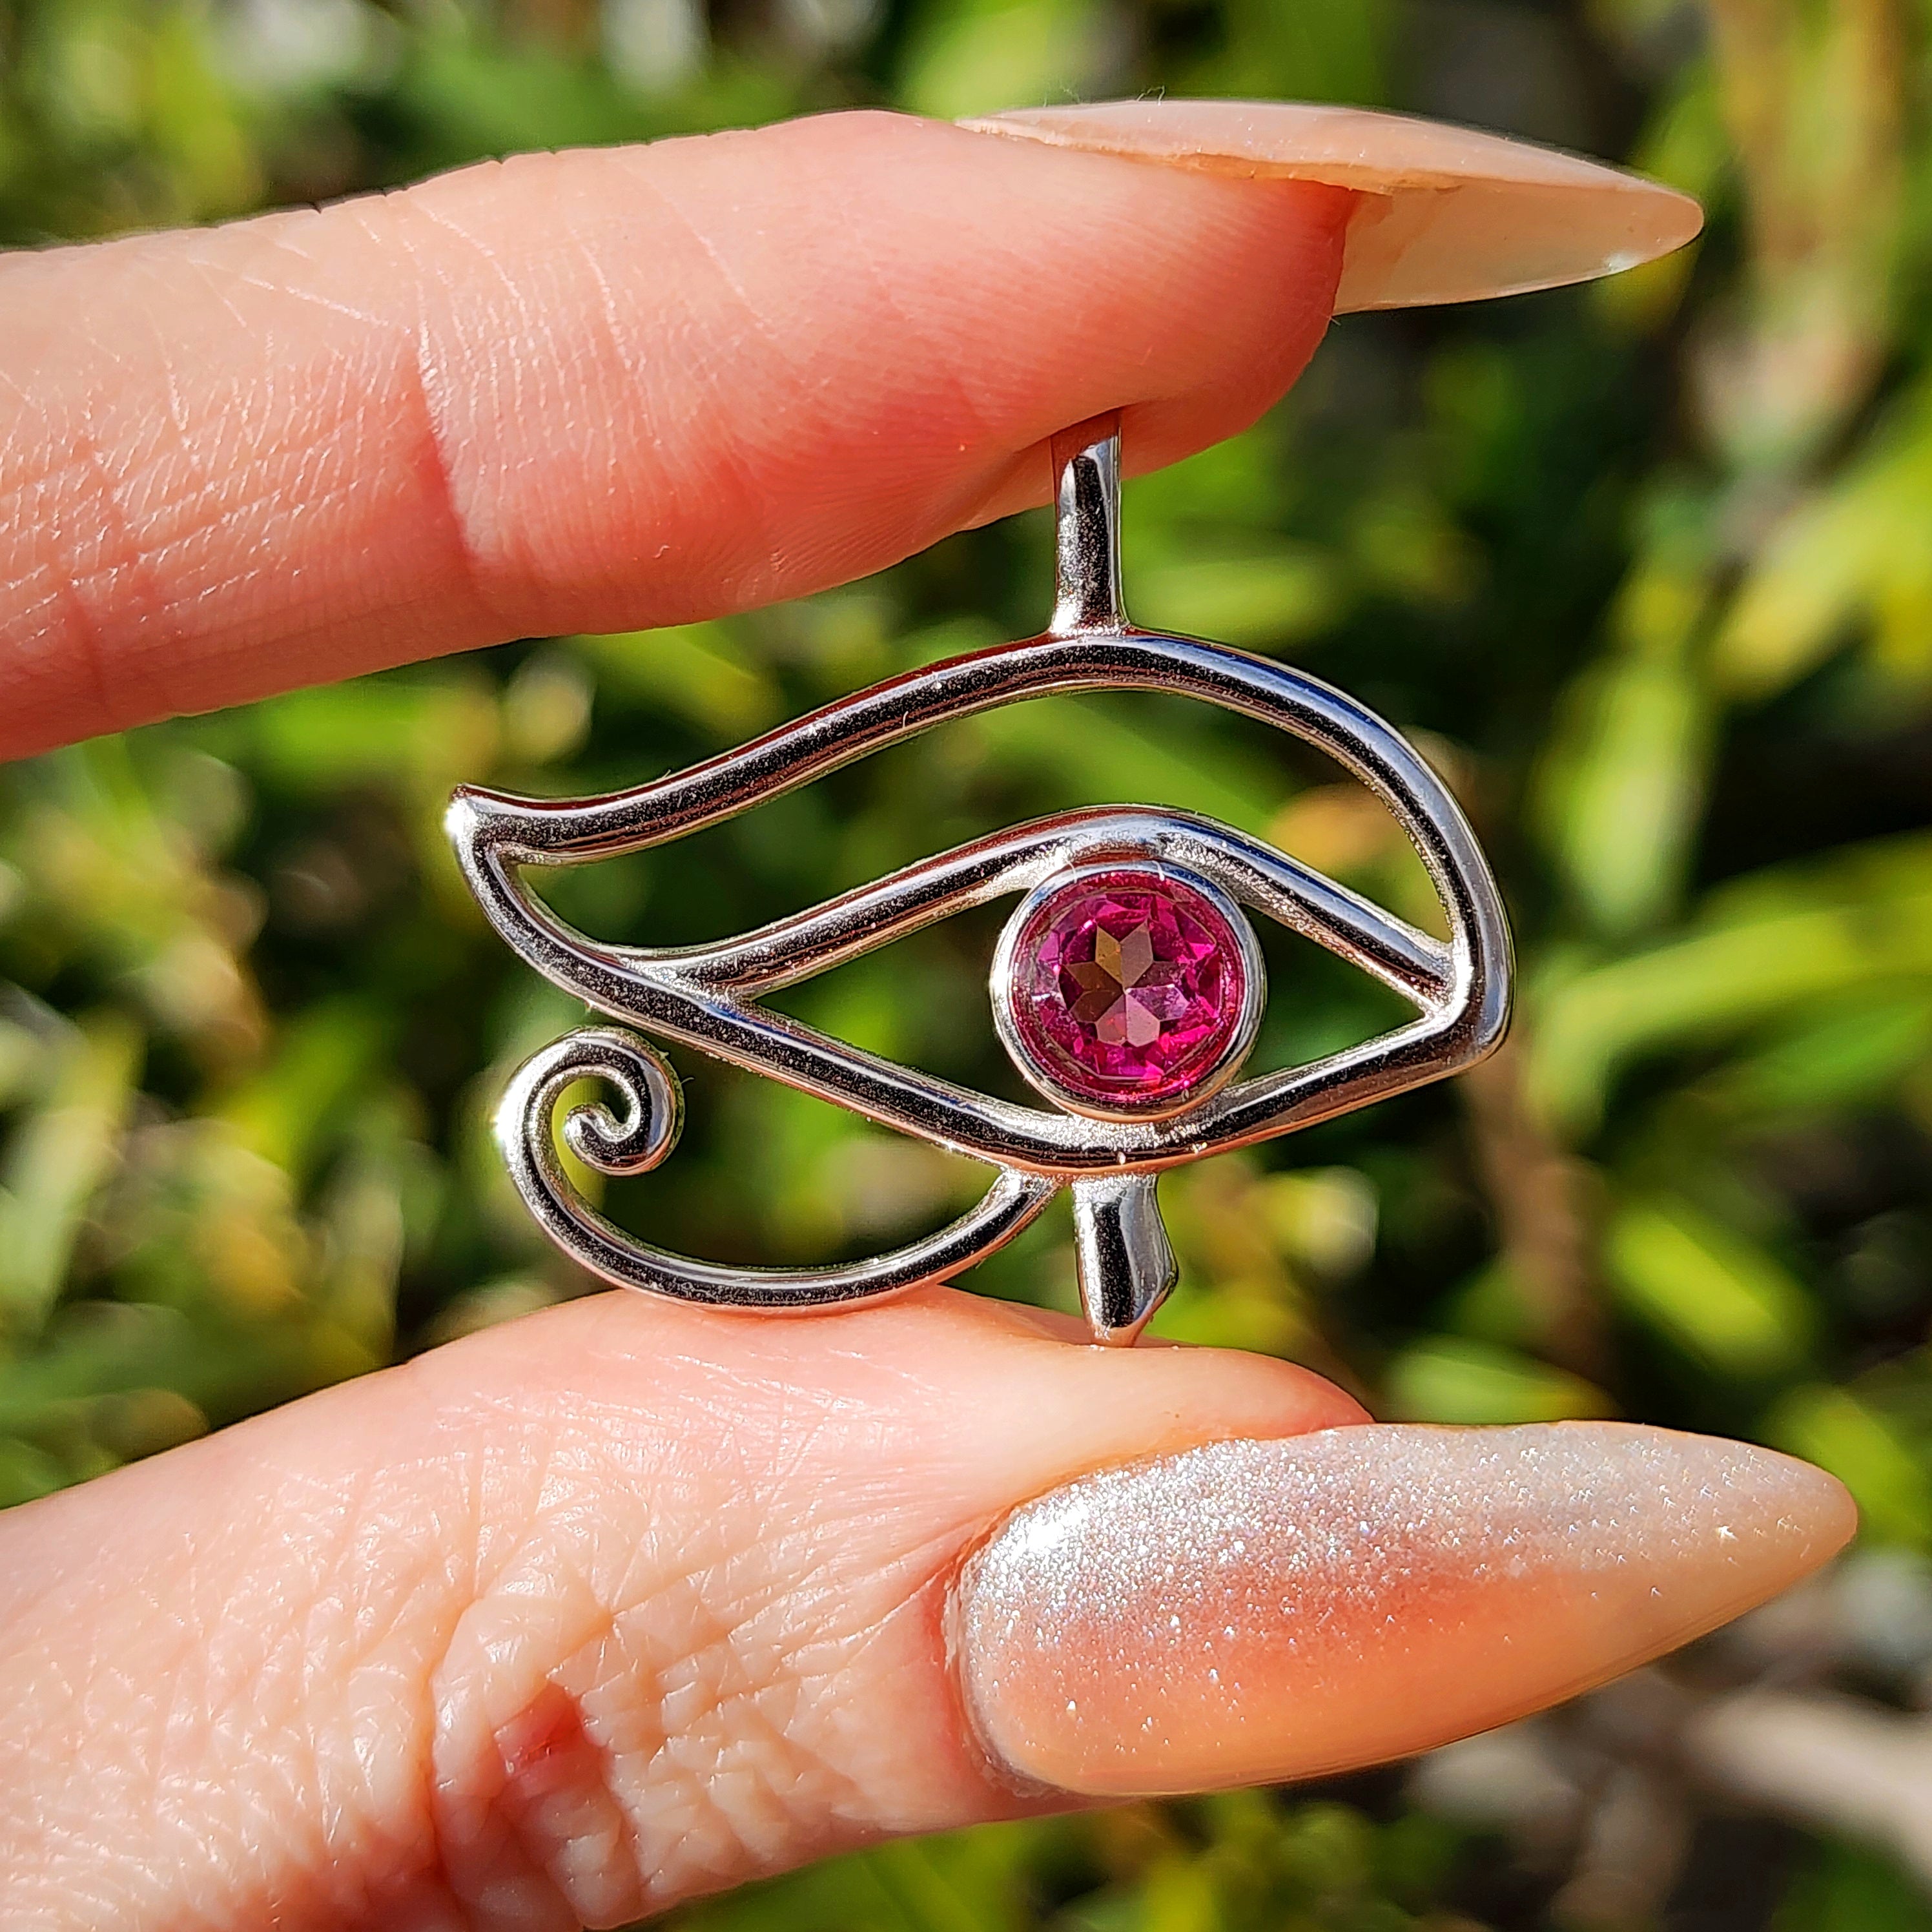 Pink Topaz Eye of Ra Amulet Pendant .925 Silver for Attracting Love, Protection and Power